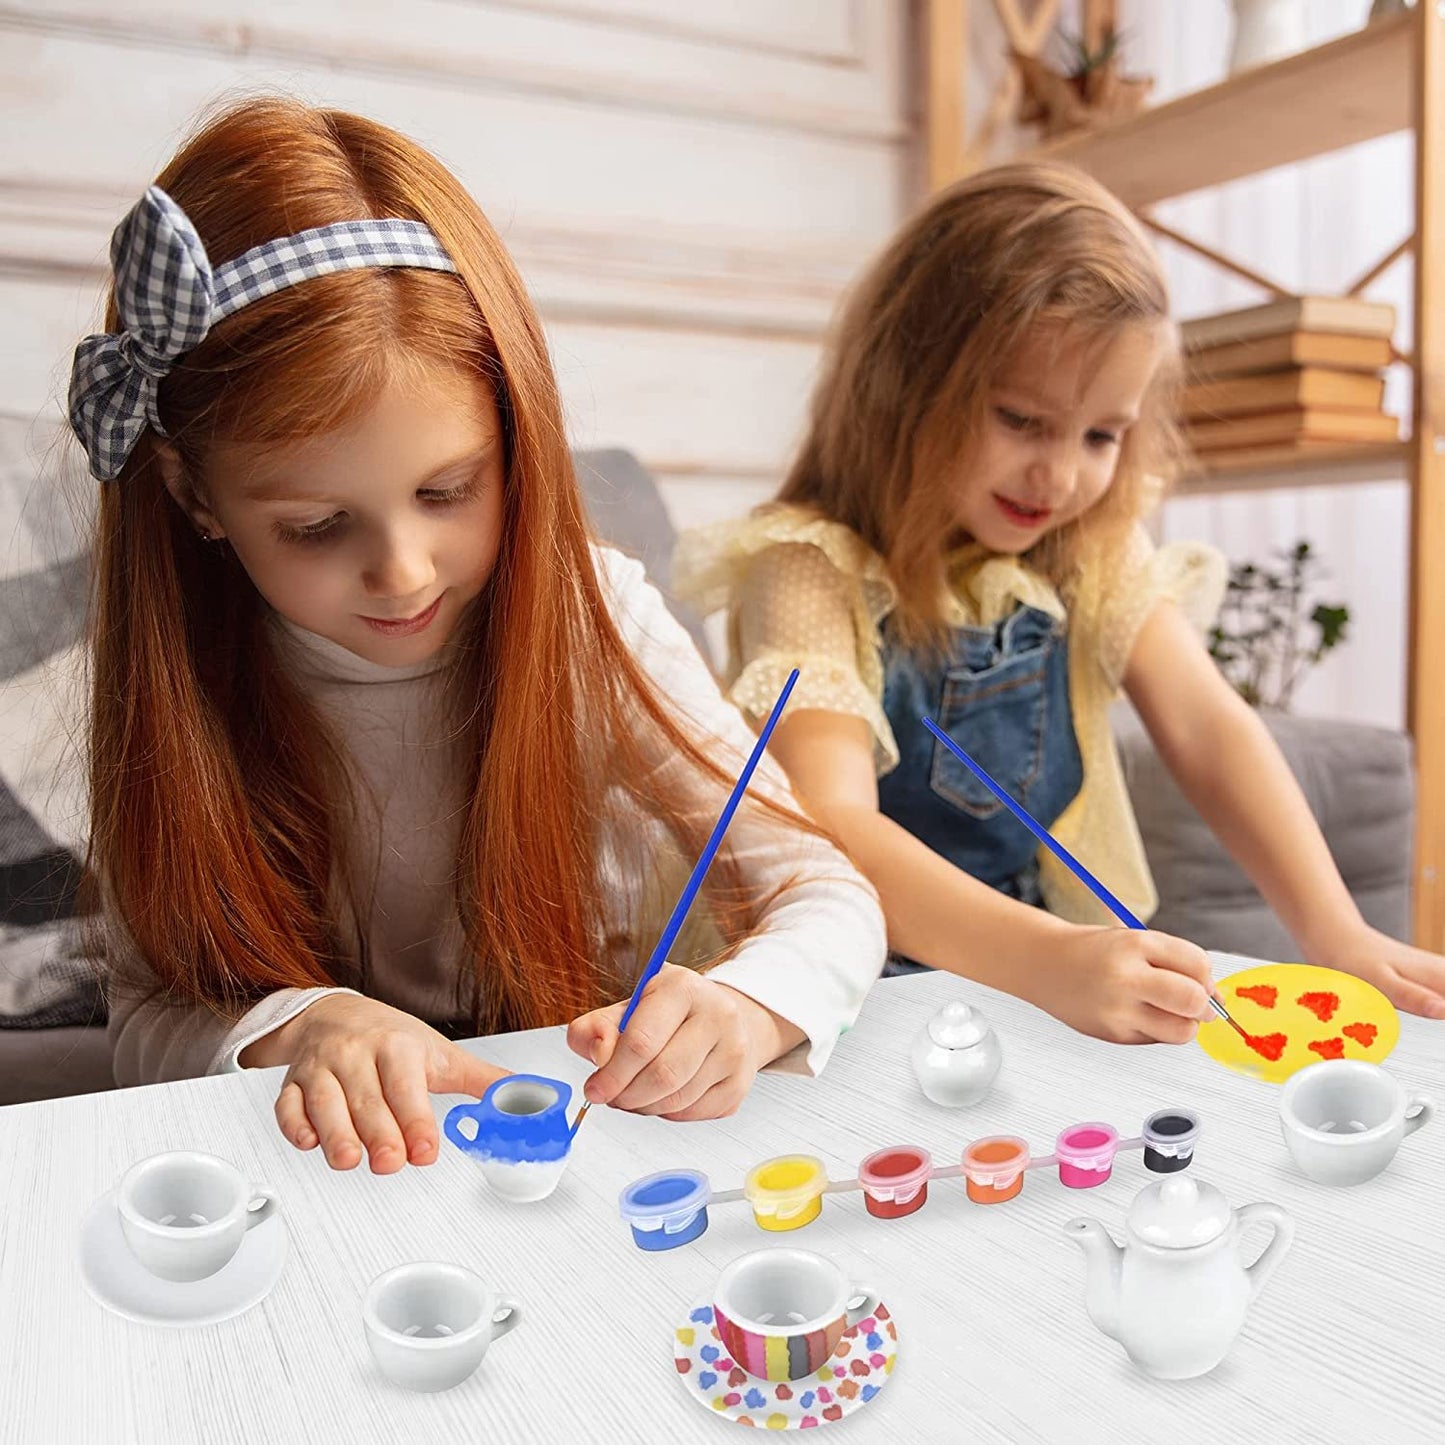 ArtCreativity Paint Your Own Play Tea Set for Kids, Ceramic Craft Tea Set for Little Girls, Kids’ Arts & Crafts Painting Kit with 13 Paintable Ceramic Dishes, 6 Paint Colors, & Paintbrush